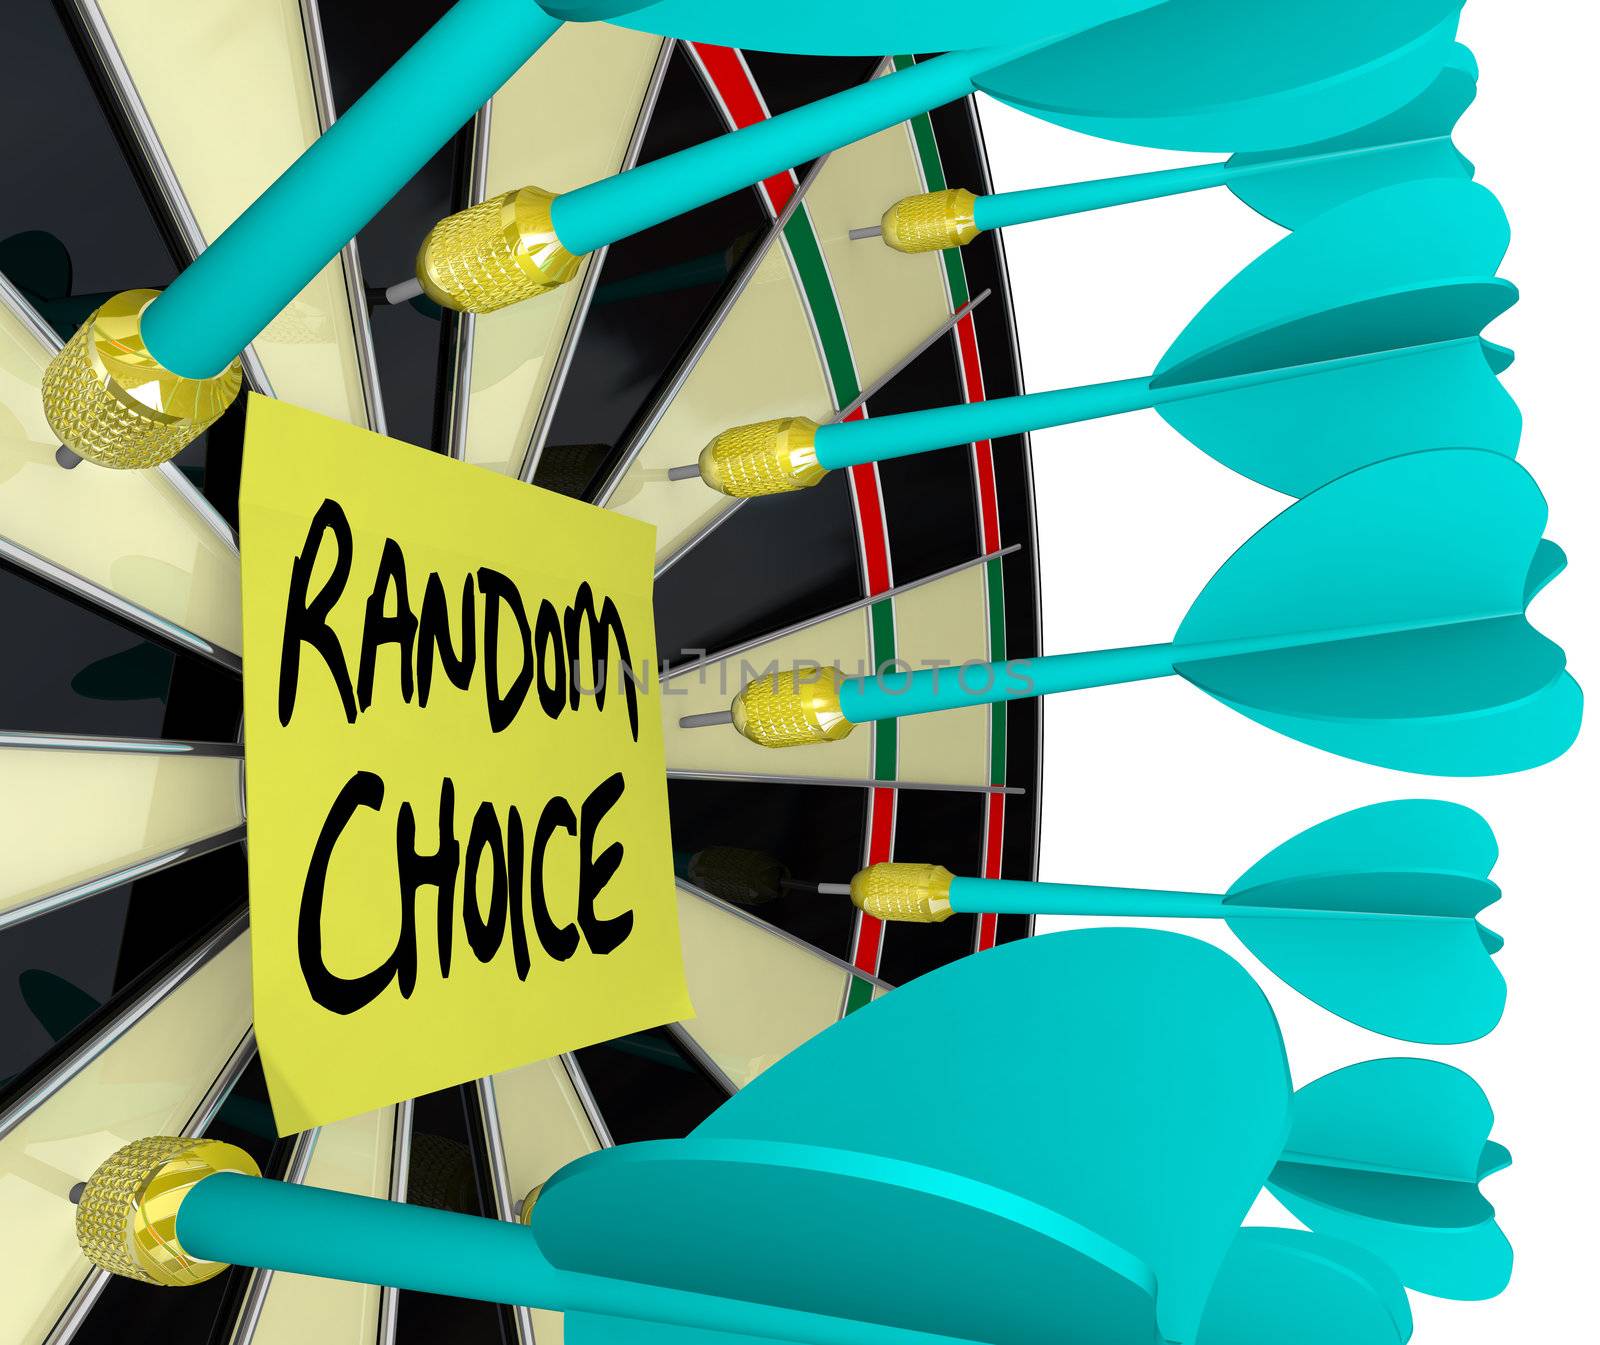 Many darts hit a dartboard around a sticky note with the words Random Choice to symbolize a blind choice, how an indecisive person may reach a randomized decision